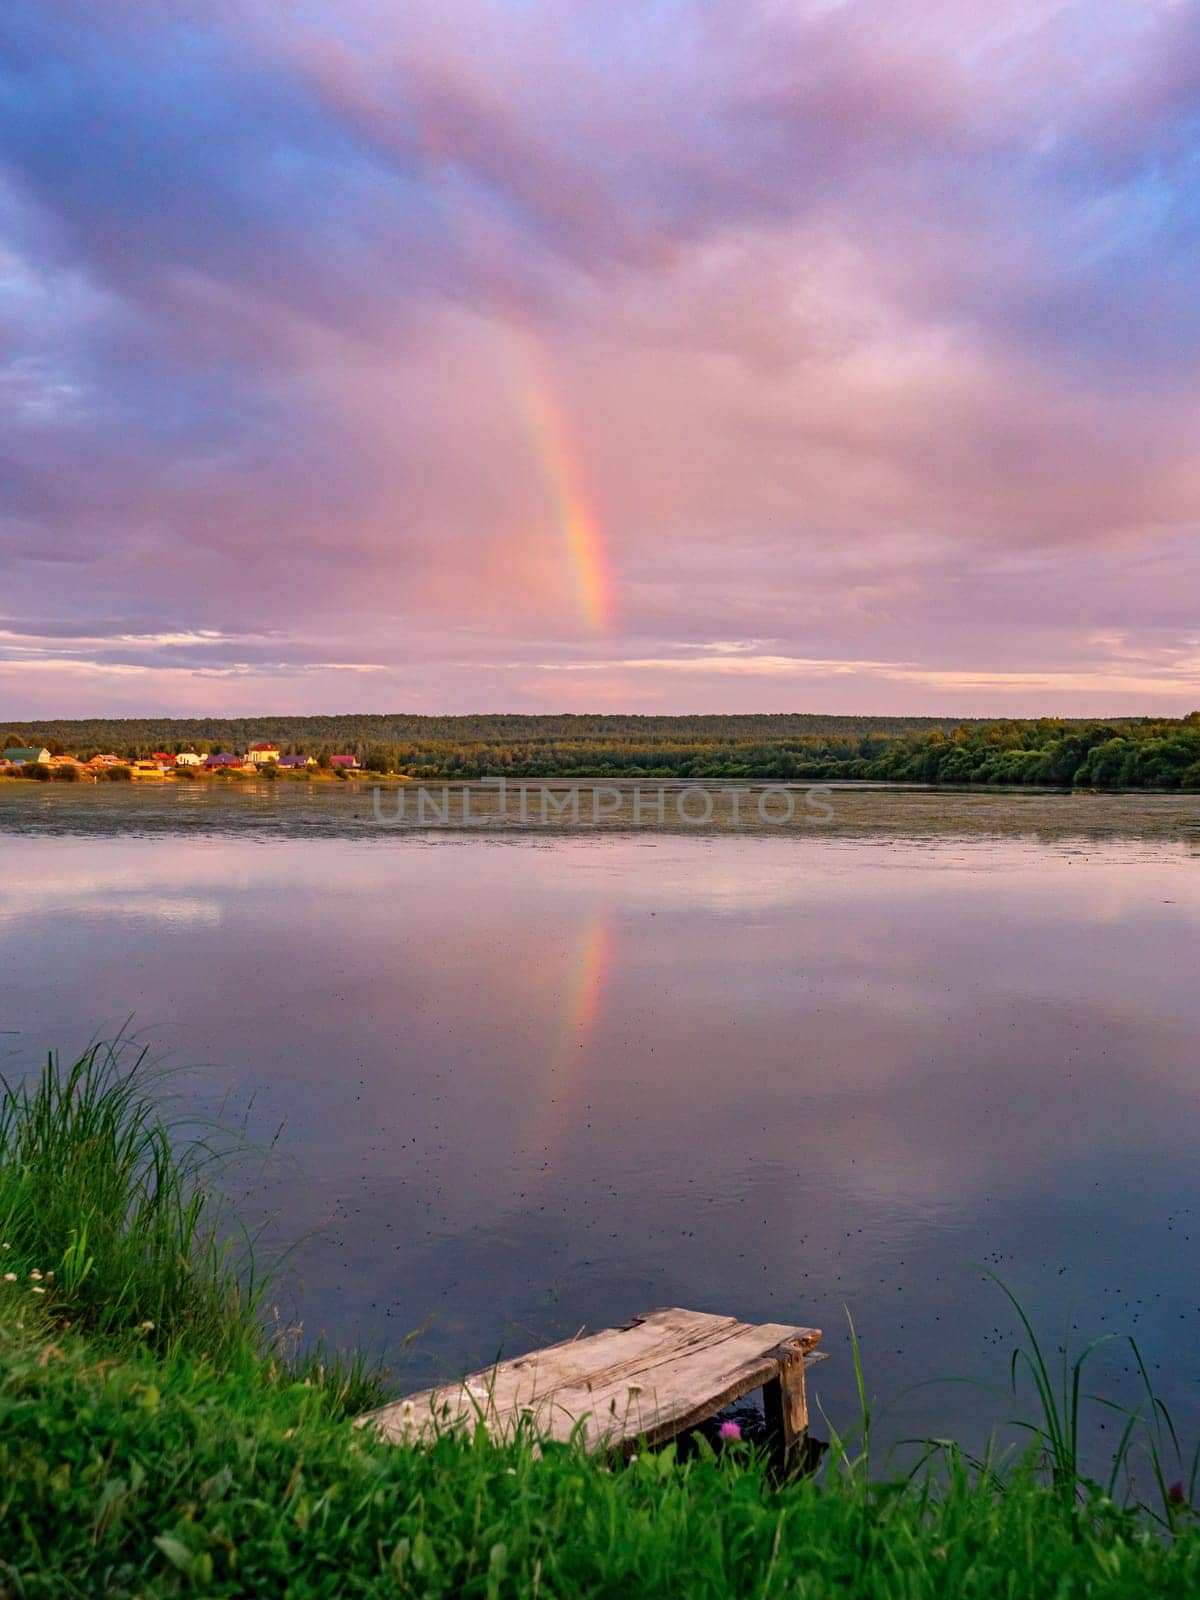 Beautiful pink sunset with rainbow reflection over calm lake at countryside evening. Tranquil lake with a wooden dock in the foreground. by Busker